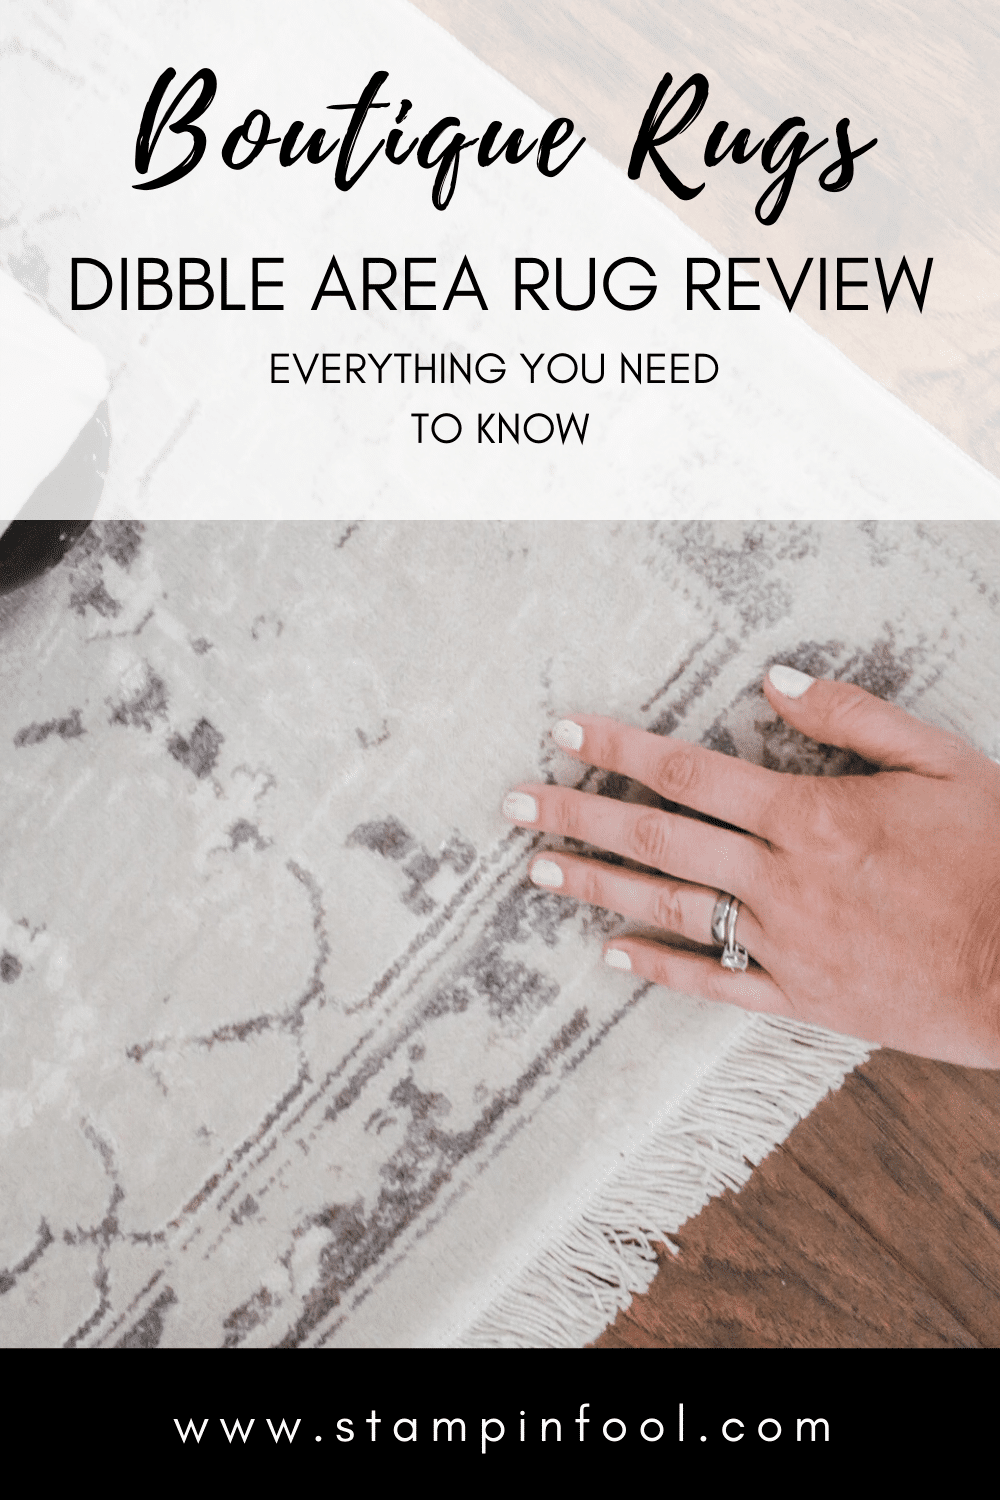 Boutique Rugs Dibble Area Rug Review: Everything you need to know about Boutique Rugs 